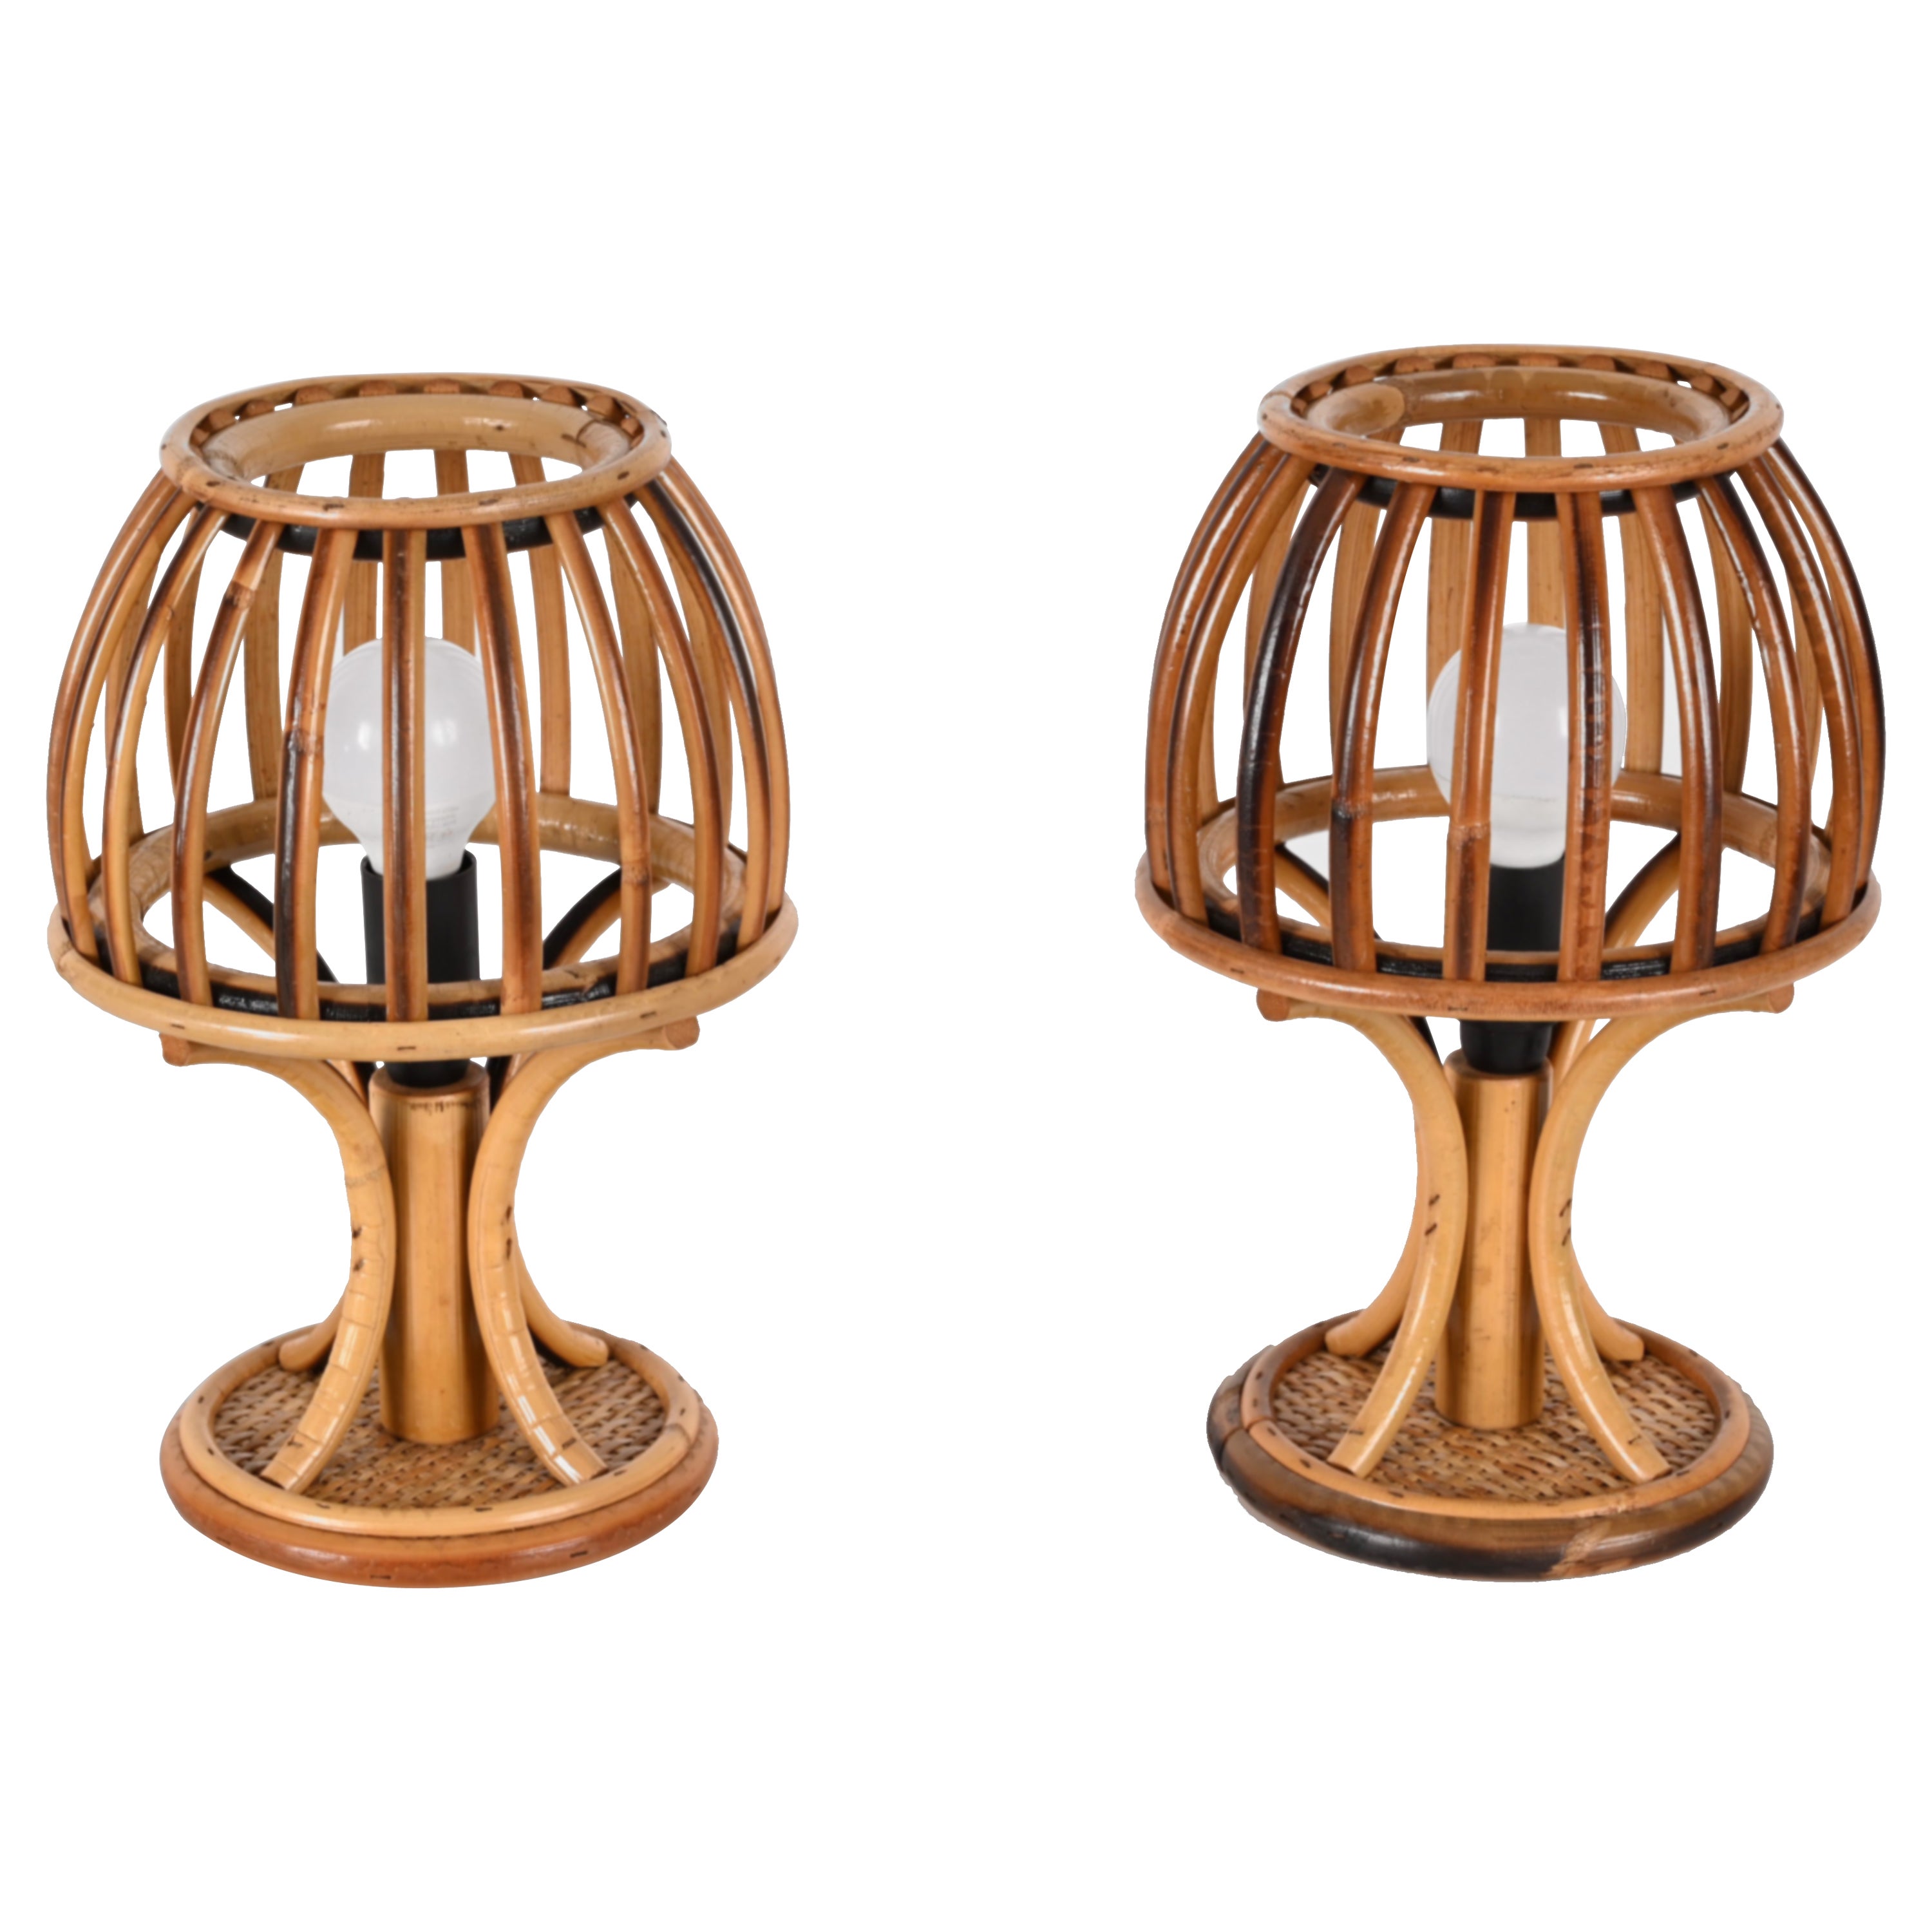 Pair of Midcentury Rattan and Bamboo Table Lamps after Louis Sognot, 1960s